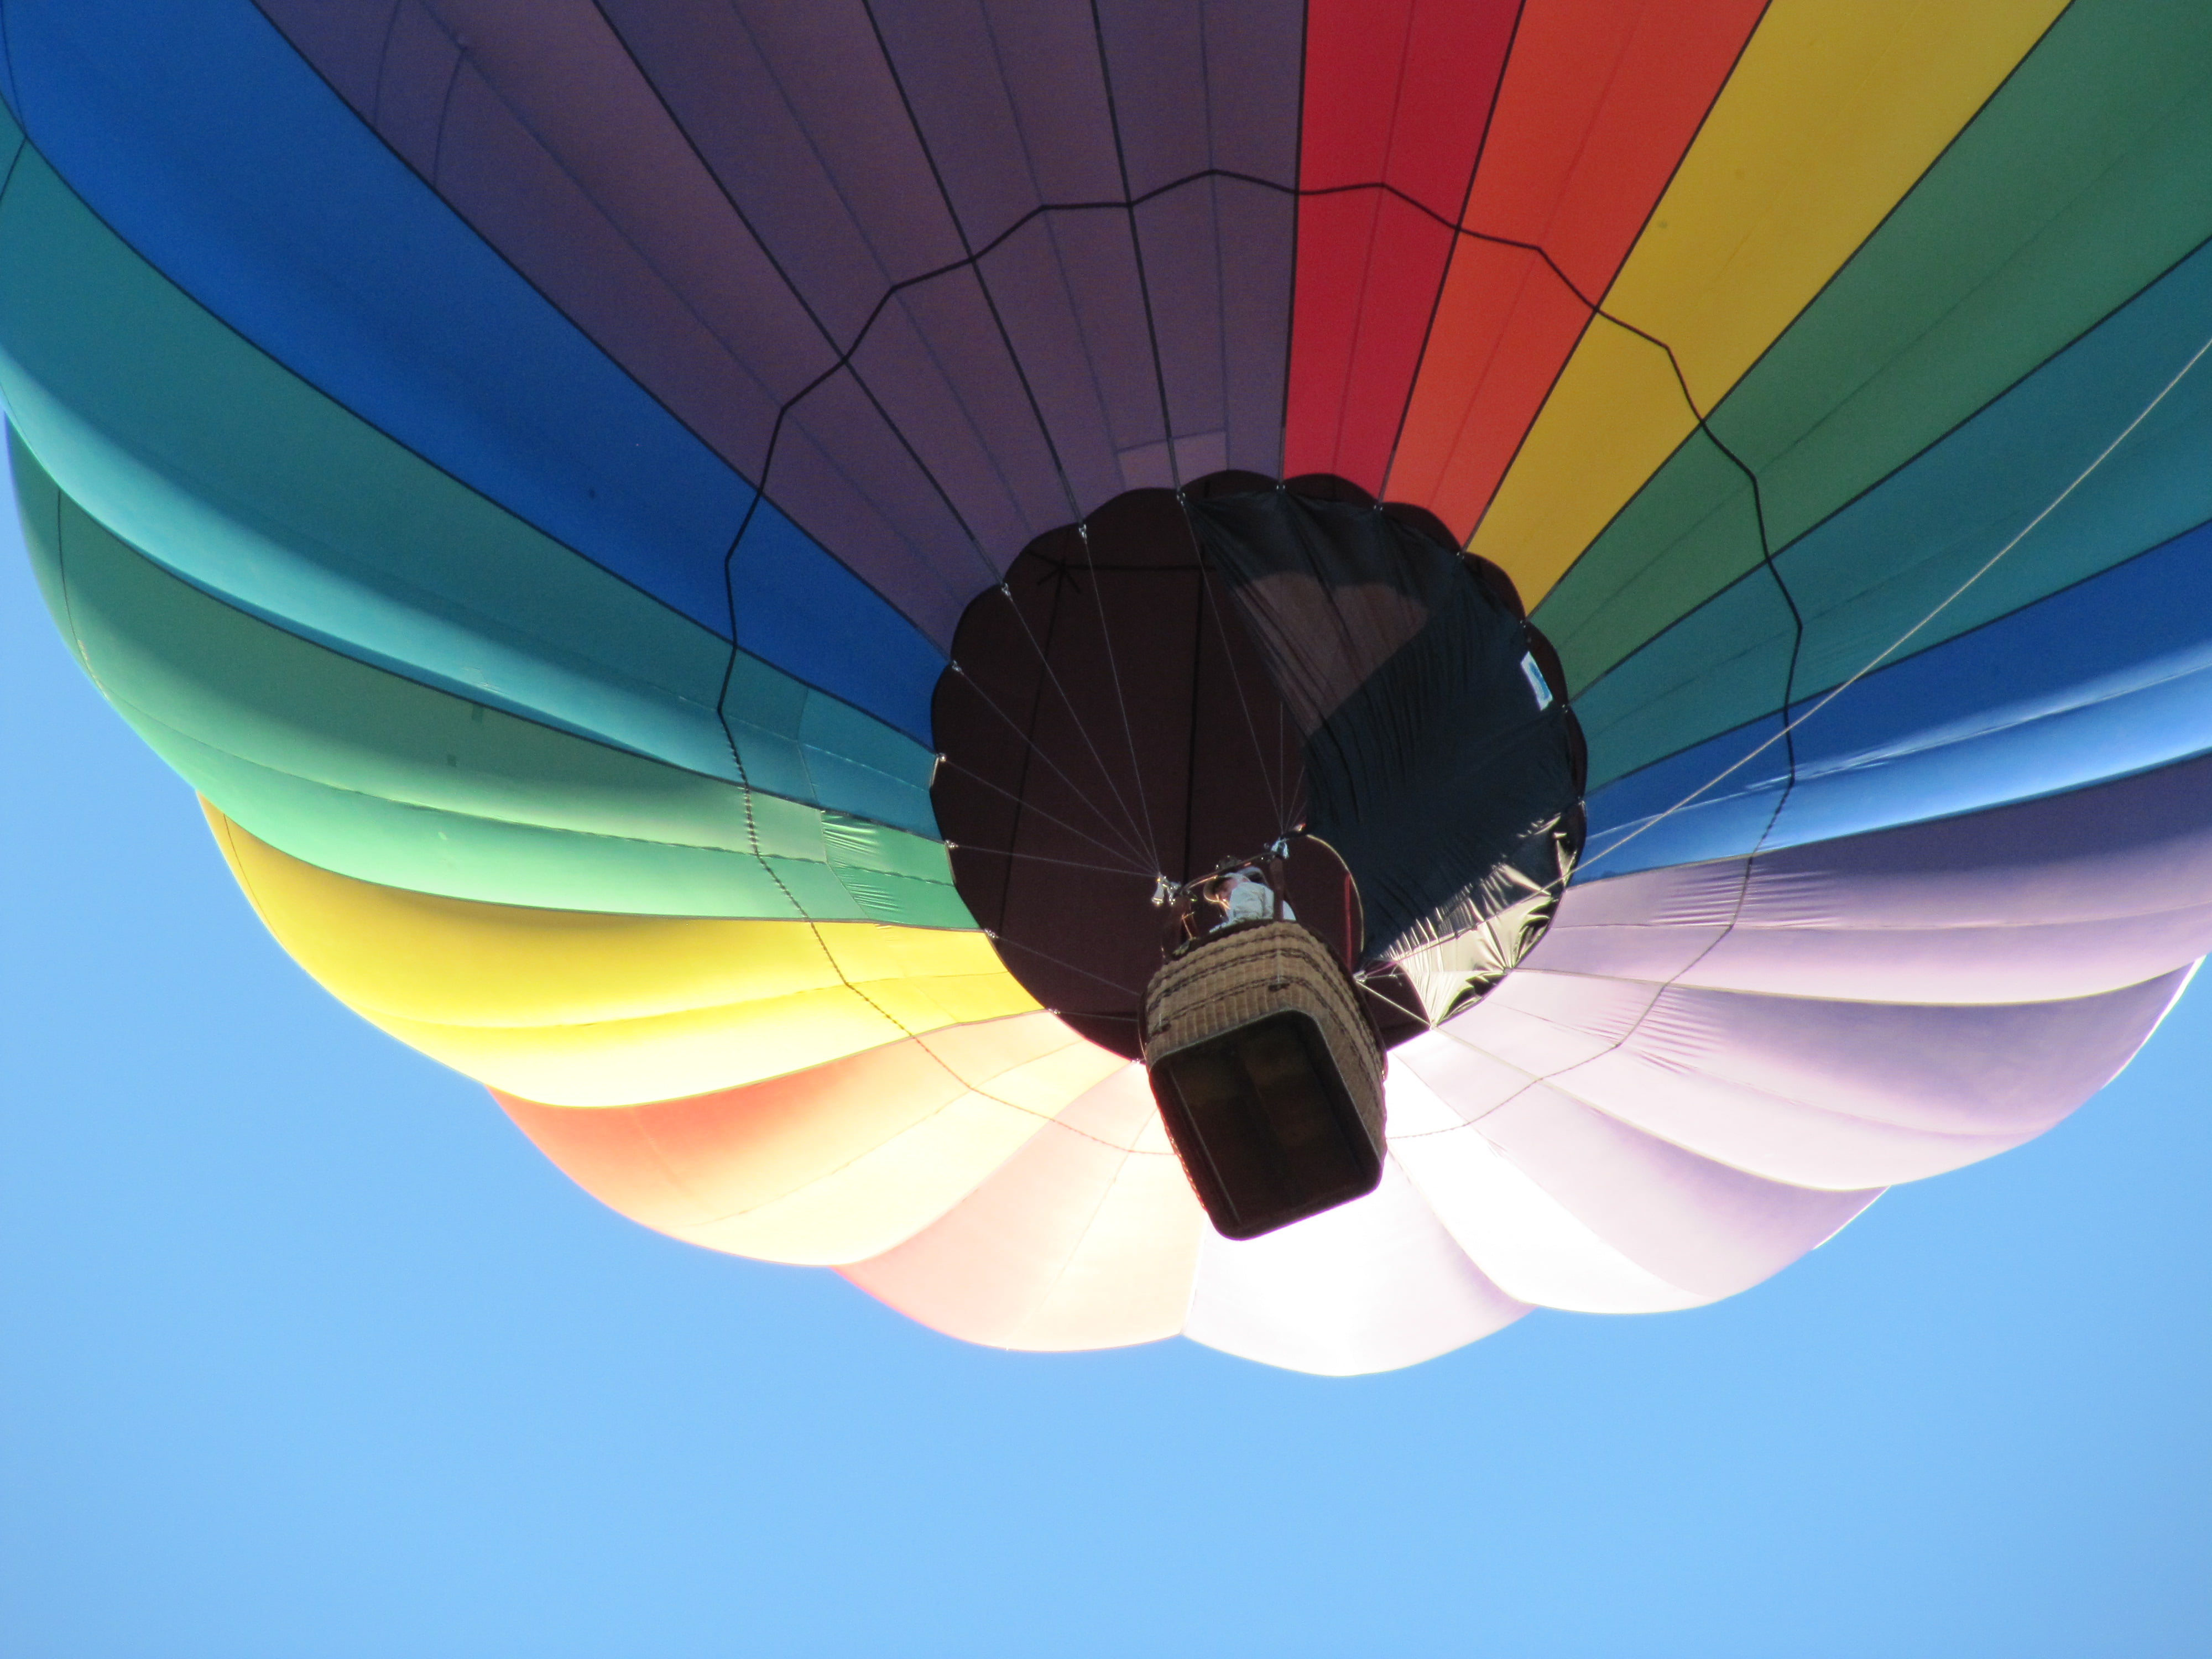 multicolored hot air balloon o, flying, adventure, sky, sport